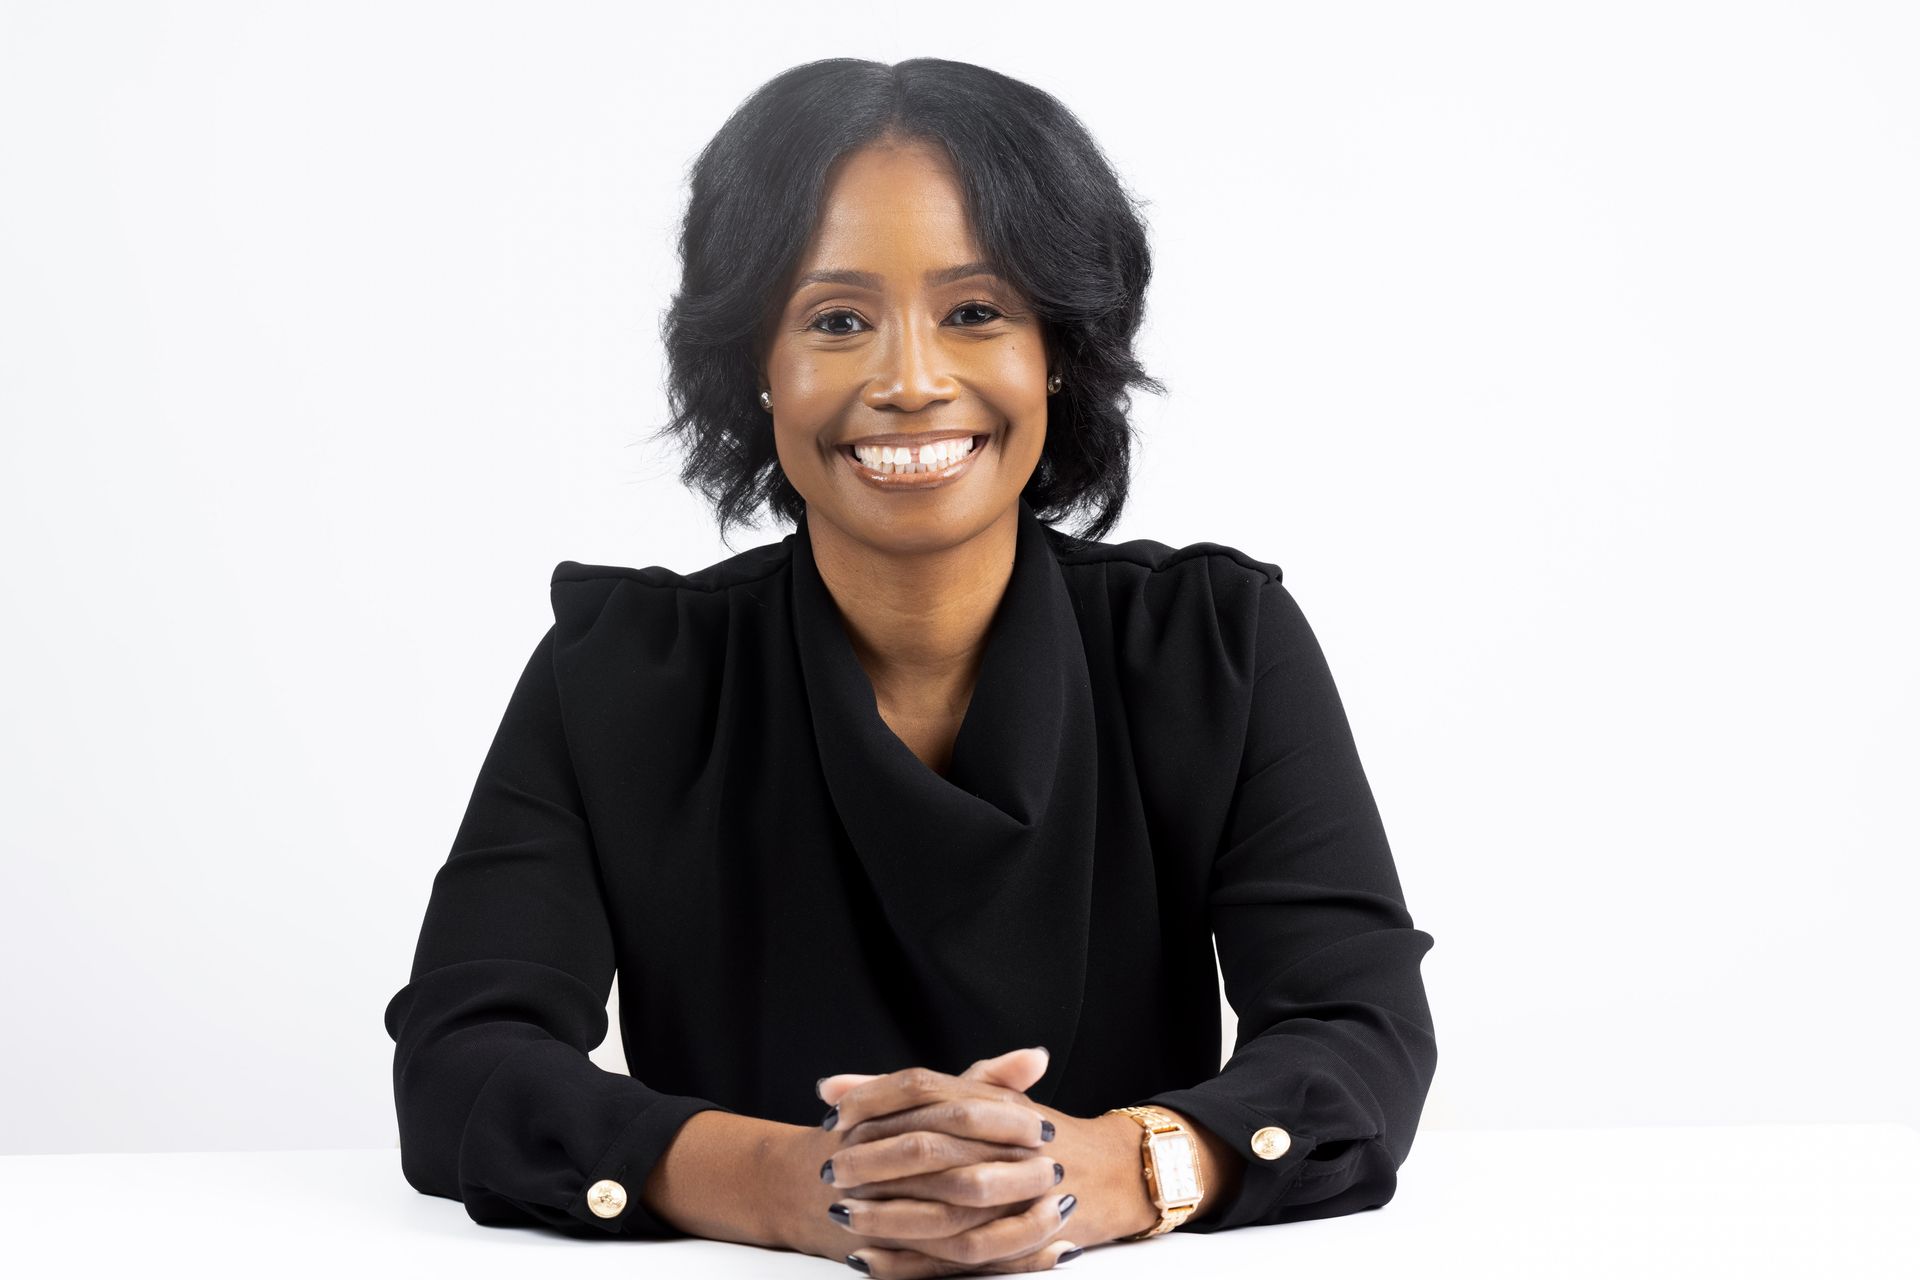 Tashia Turner provides full-service property management services located in baltimore